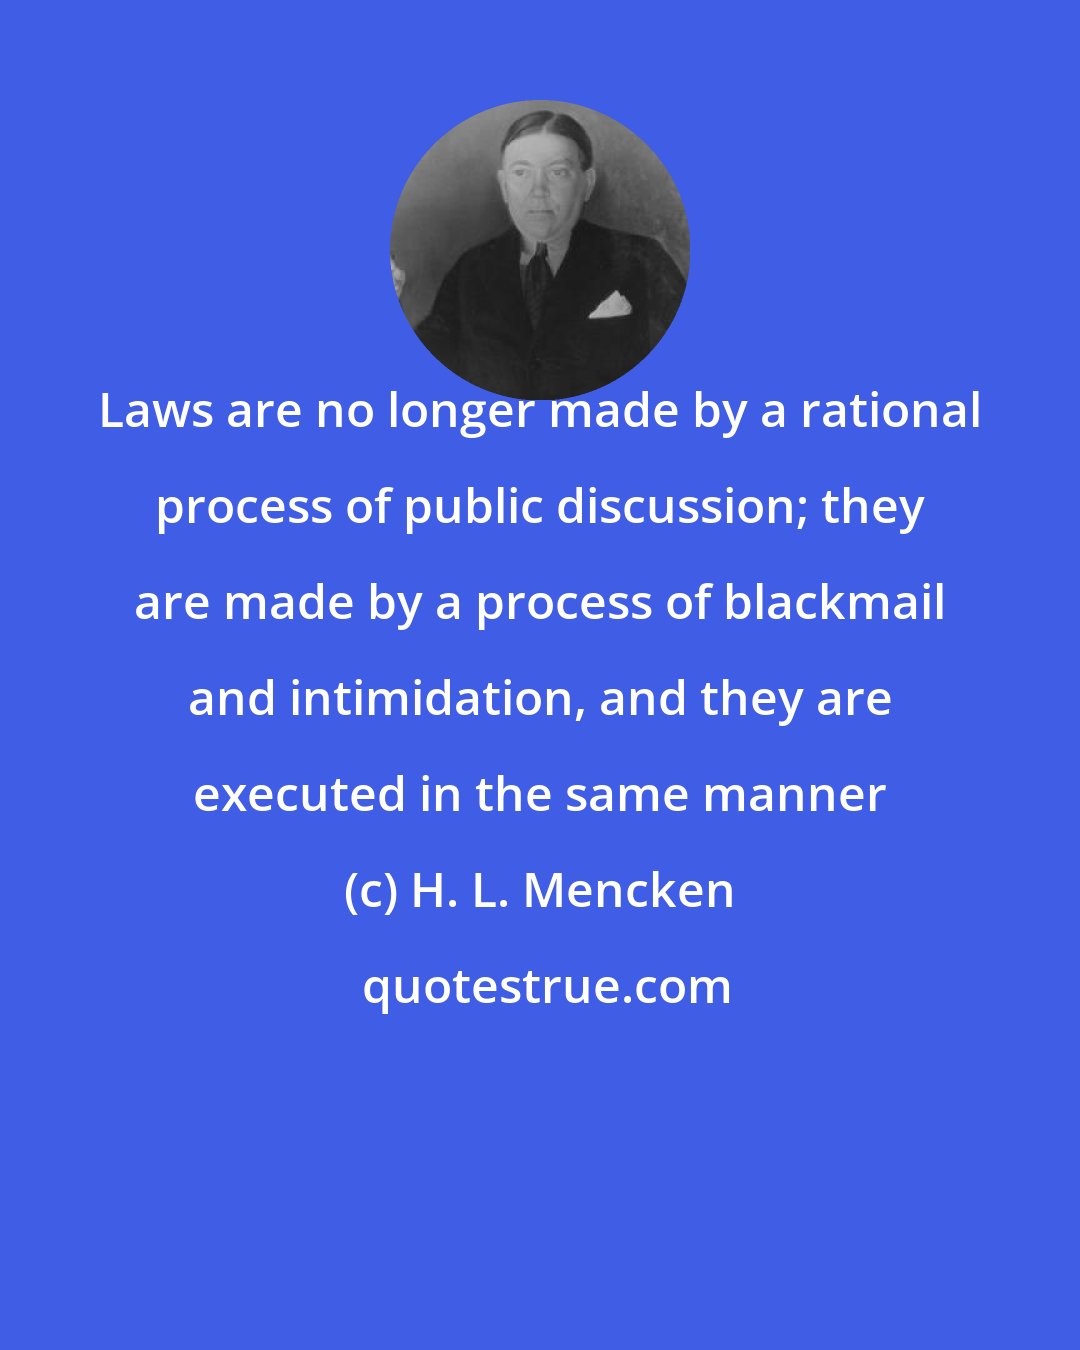 H. L. Mencken: Laws are no longer made by a rational process of public discussion; they are made by a process of blackmail and intimidation, and they are executed in the same manner